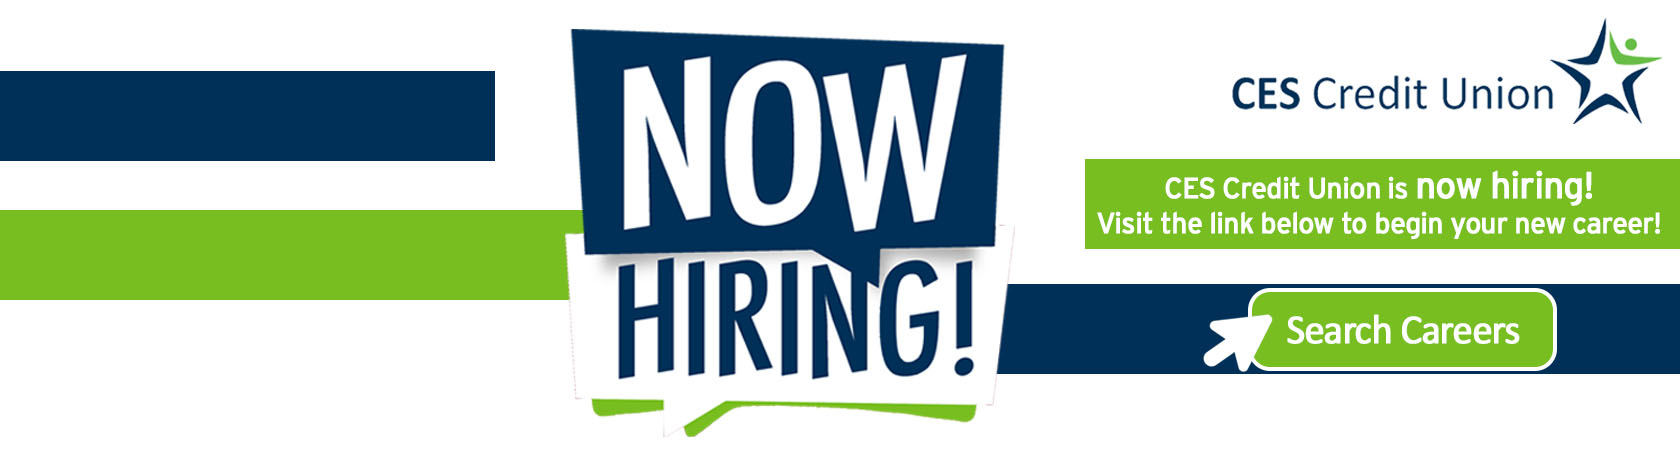 CES Credit Union is hiring! Click here to visit our job openings.